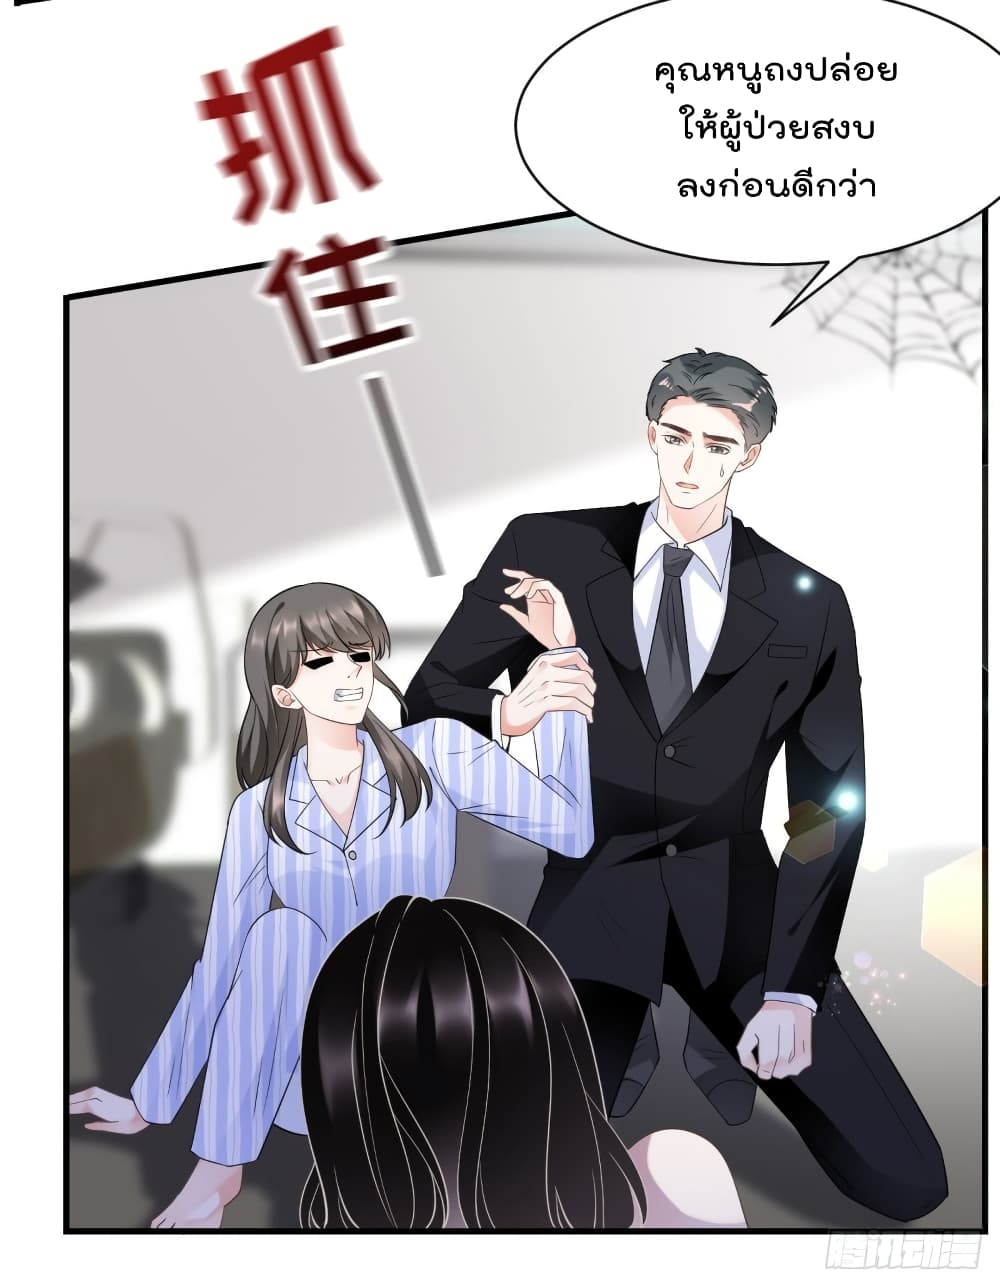 What Can the Eldest Lady Have คุณหนูใหญ่ ทำไมคุณร้ายอย่างนี้ 26-26